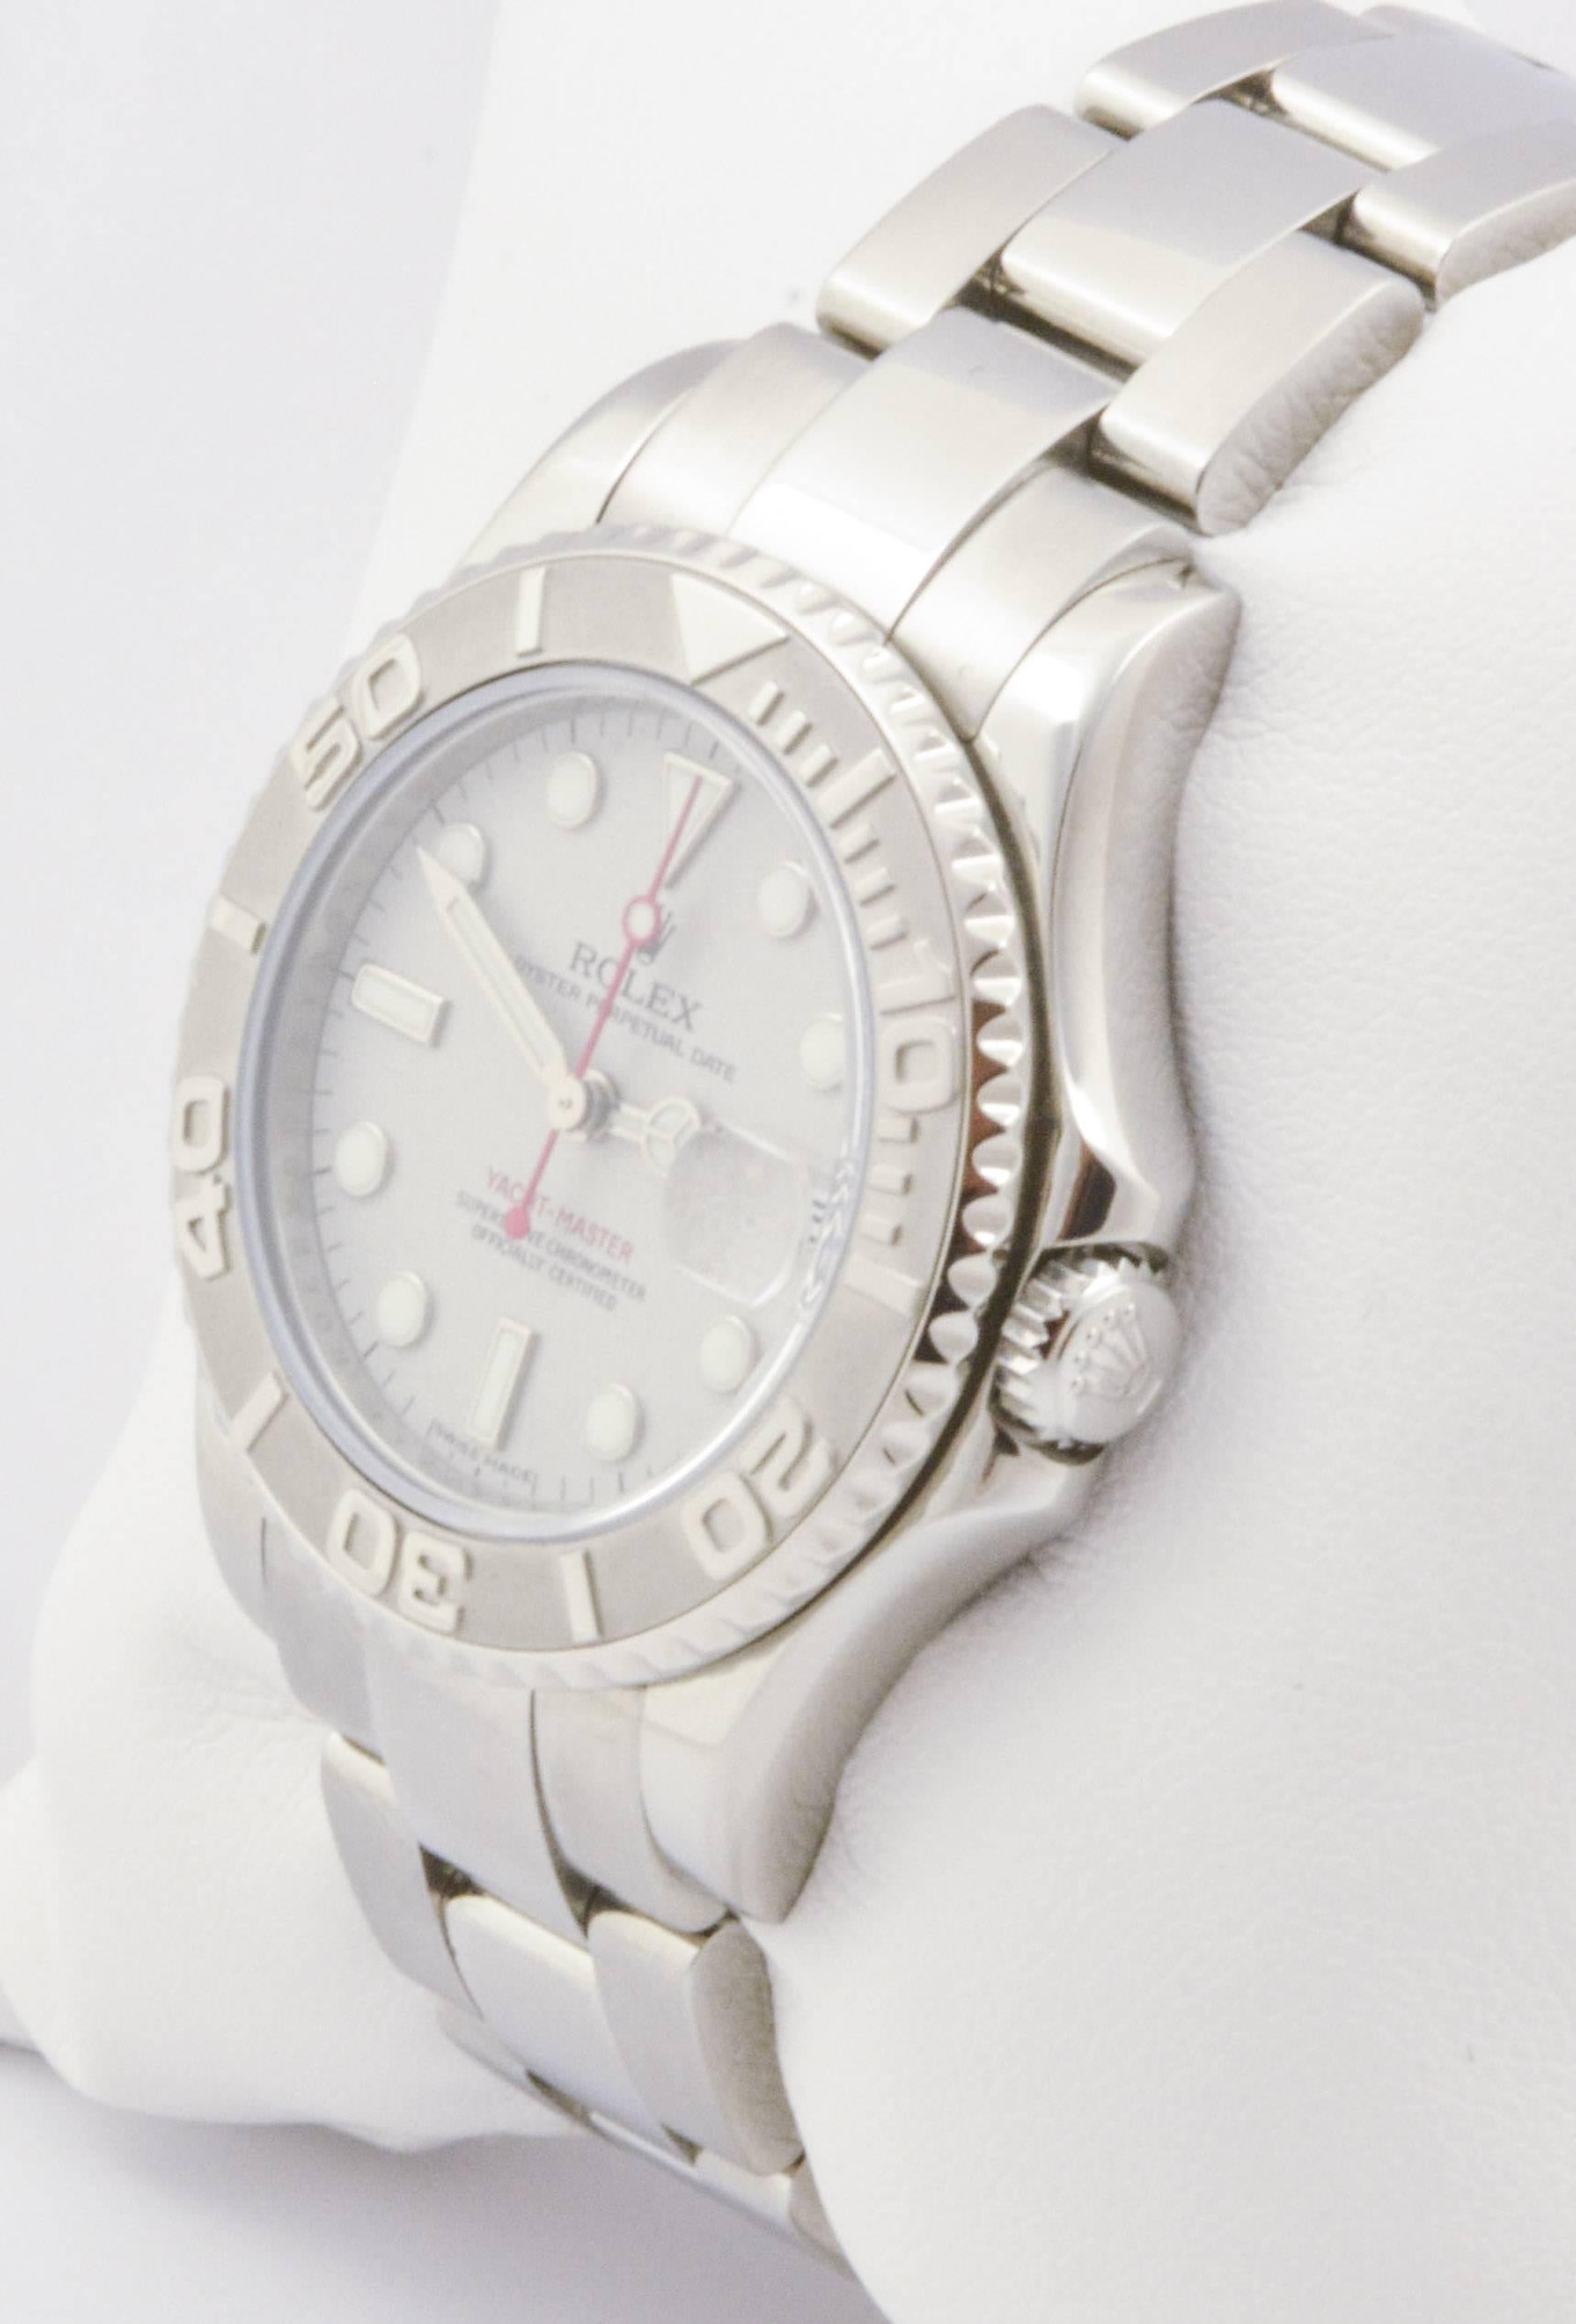 Stainless steel and platinum combine beautifully with white dial markers, a rotating bezel, auto movement, and an Oyster style bracelet in this unforgettable, certified pre-owned 35mm Rolex watch. Reference #168622.